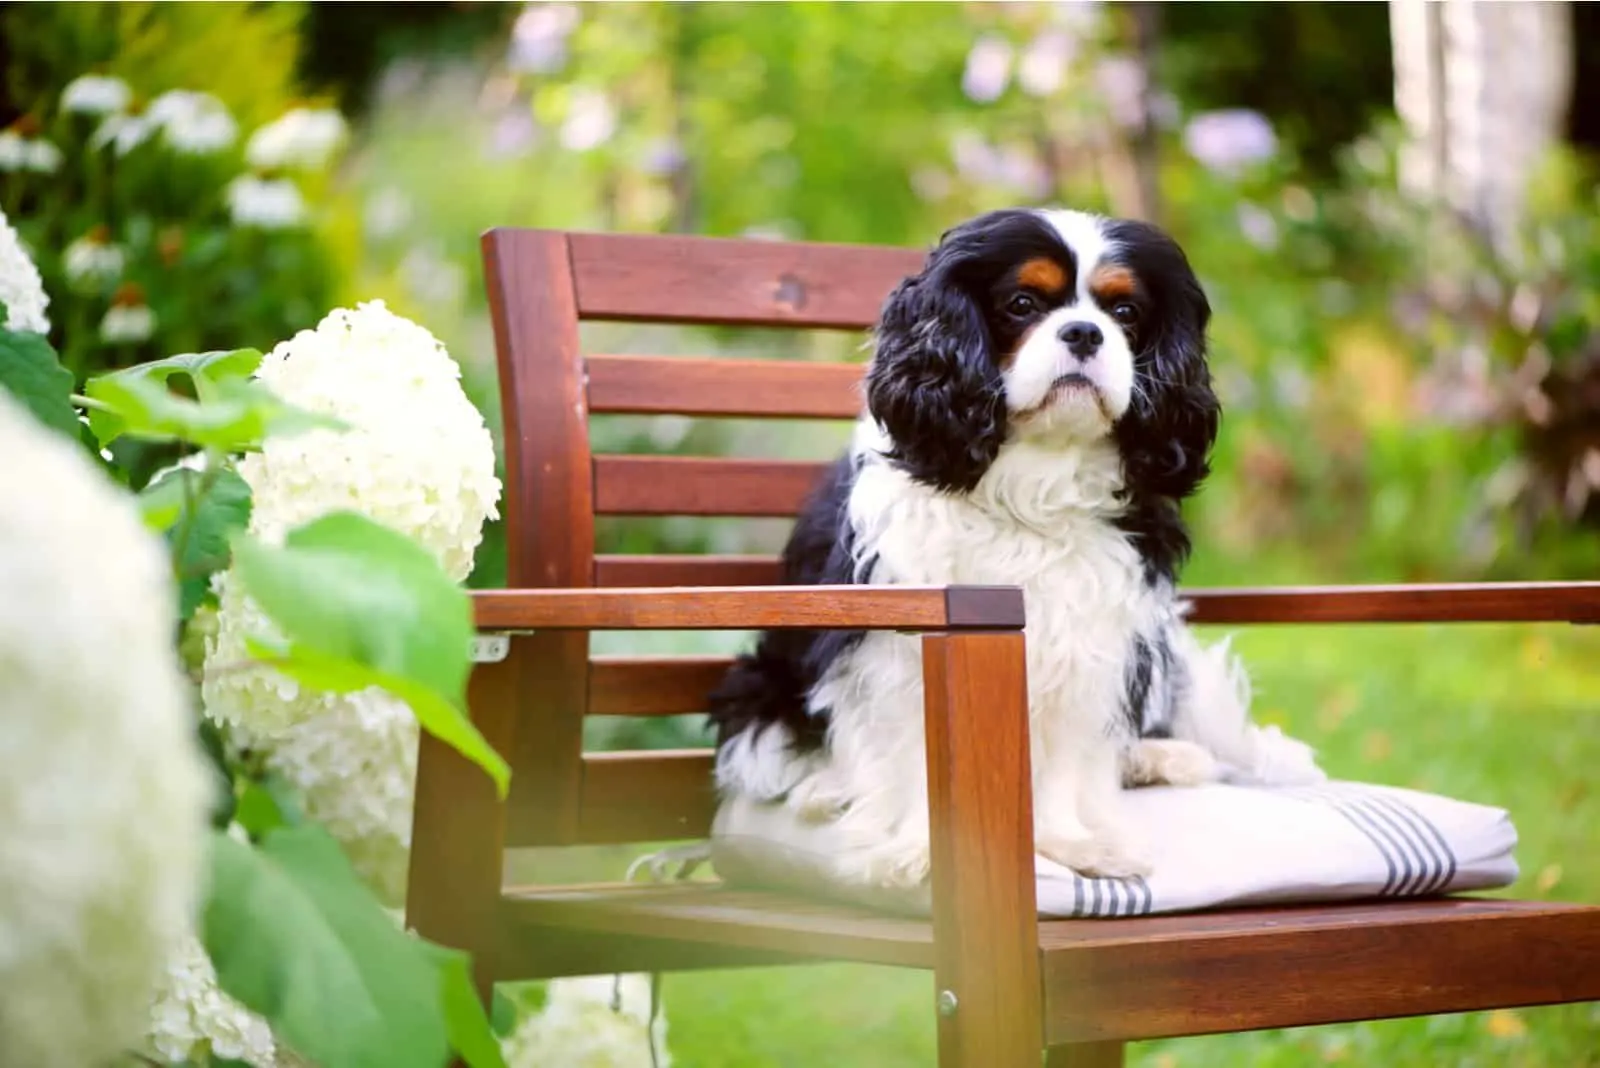 The Cavalier King Charles Spaniel sits on a bench